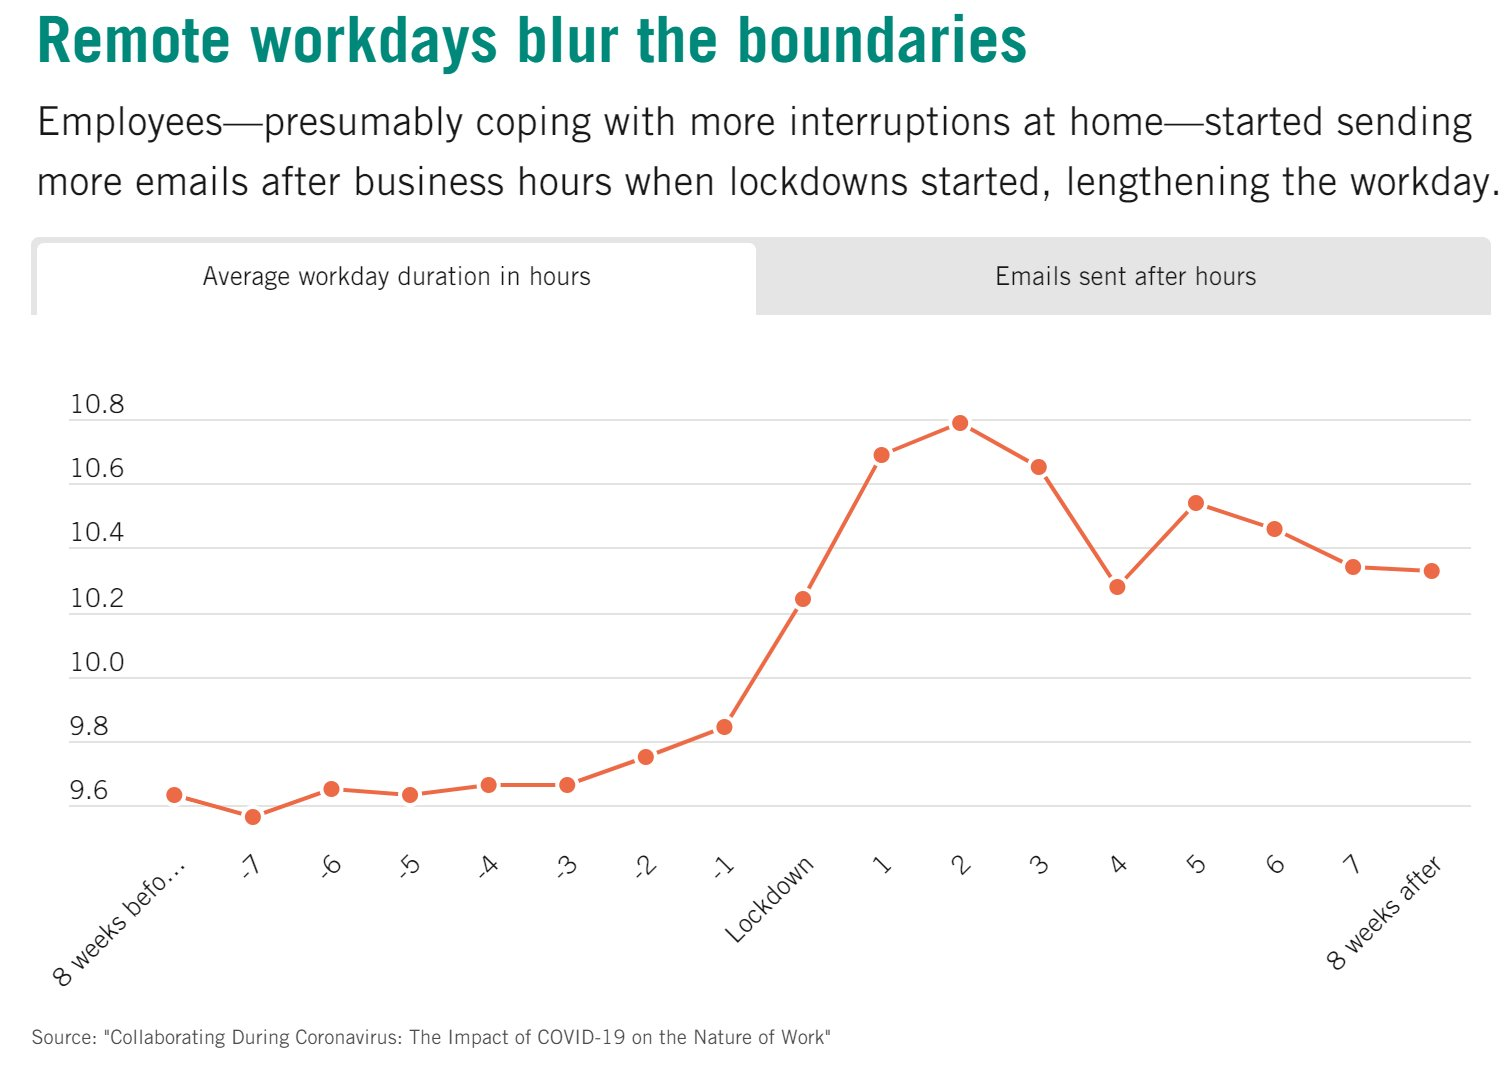 Line graph of remote workdays blurring the boundaries of average workday duration in hours